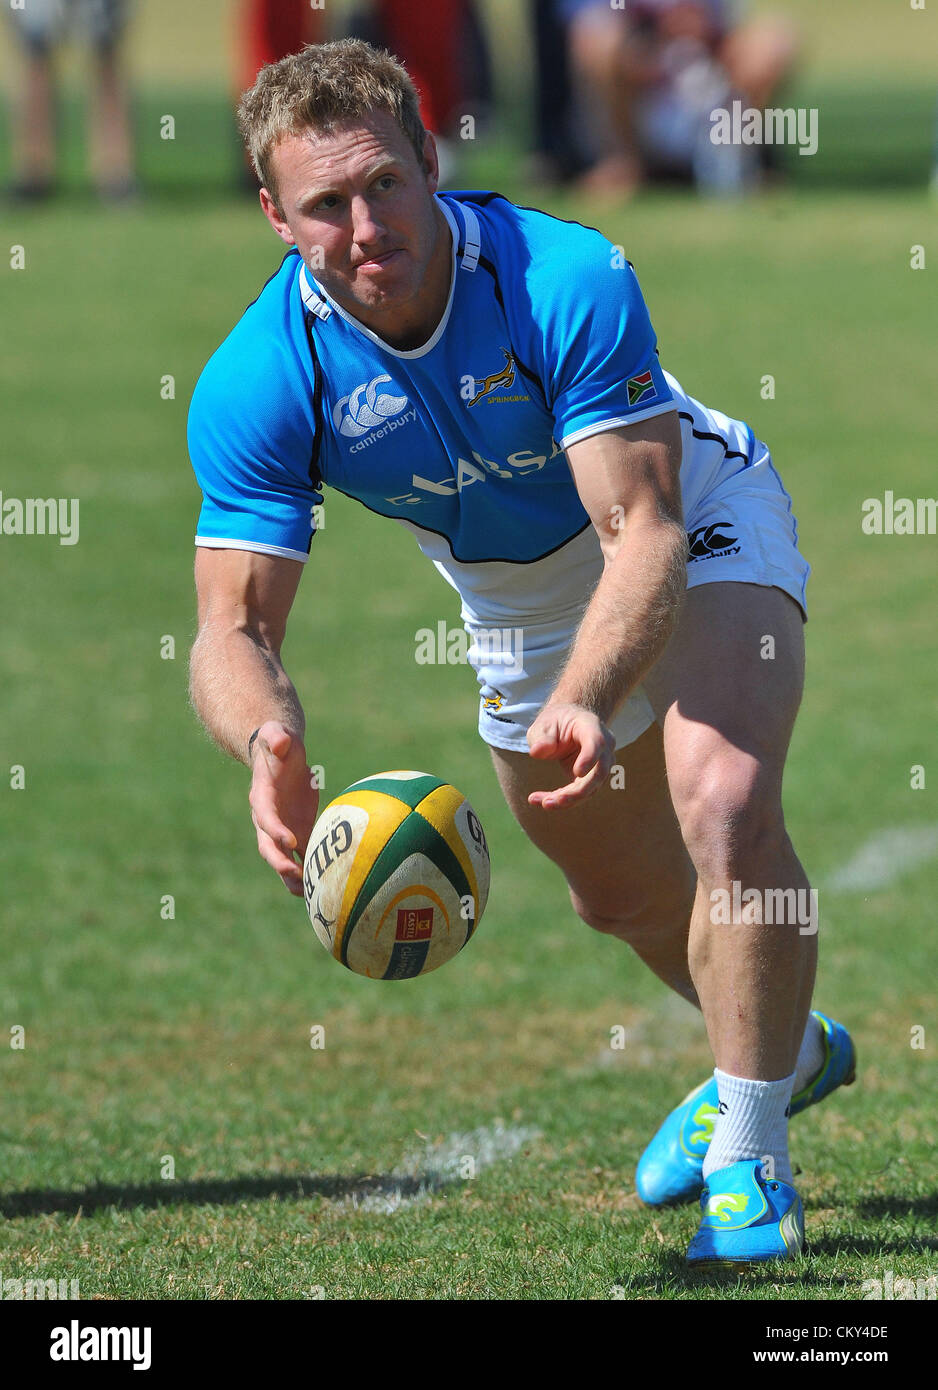 JOHANNESBURG, SOUTH AFRICA - SEPTEMBER 01, Jano Vermaak during the South African national rugby team field session and media conference at KES on September 01, 2012 in Johannesburg, South Africa Photo by Duif du Toit / Gallo Images Stock Photo